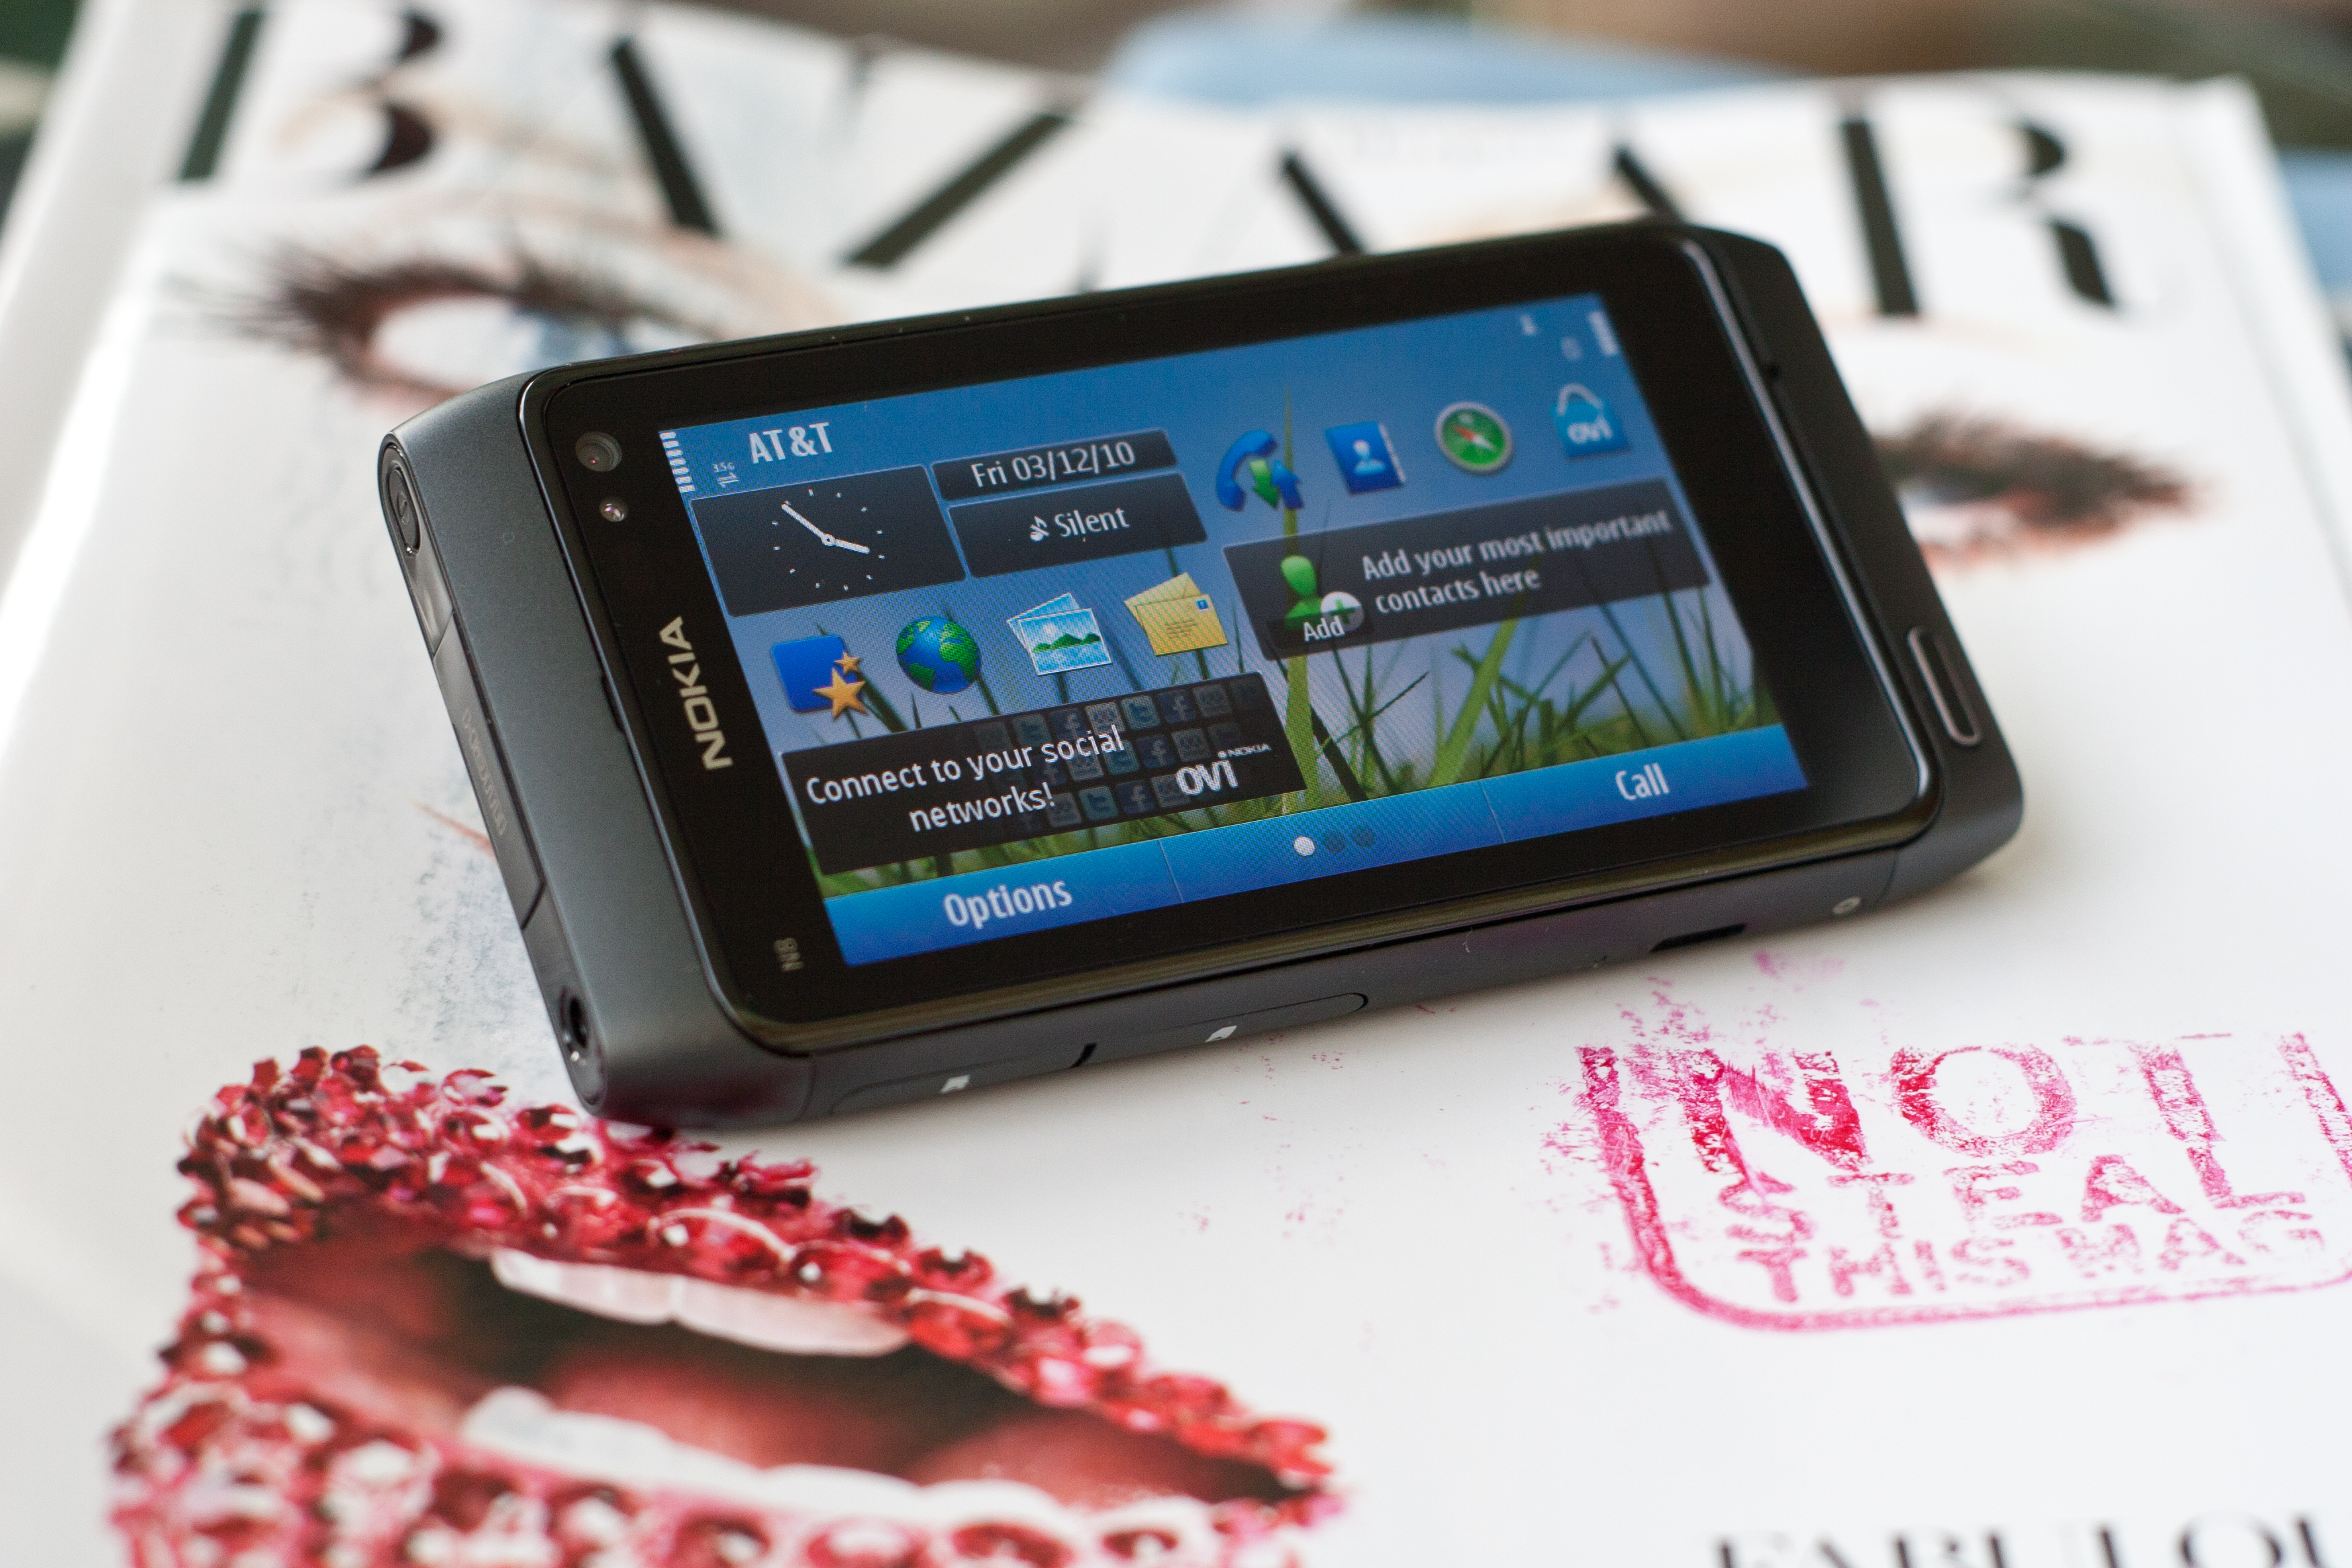 The new multimedia smartphone N8 of the company Nokia is presented